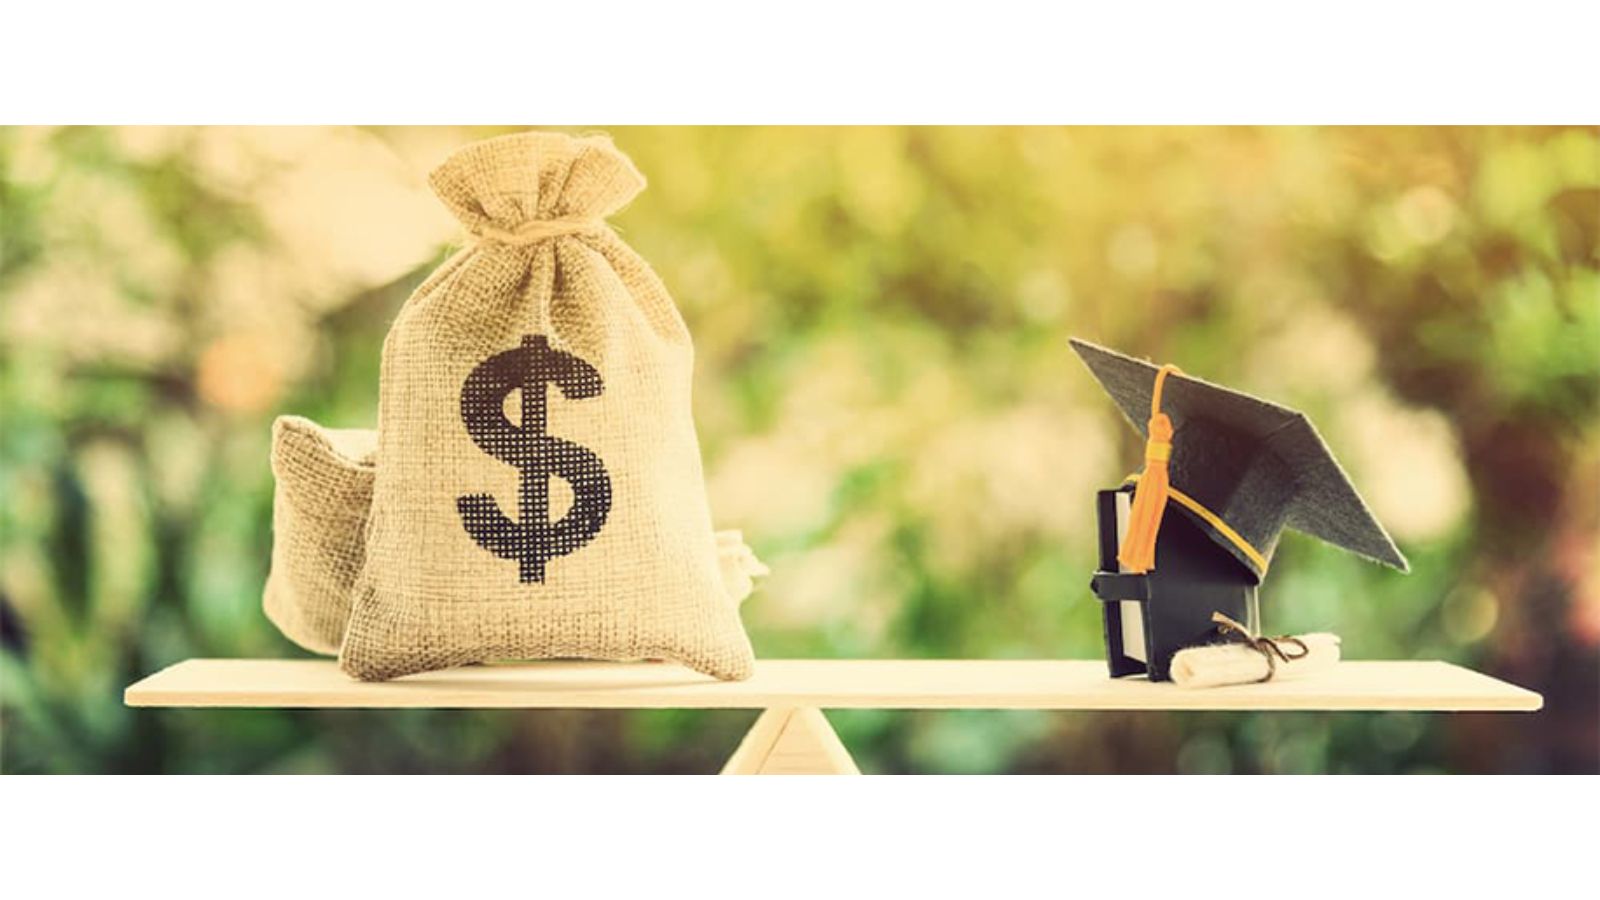 _Strategies for Students to Access More Financial Support in College